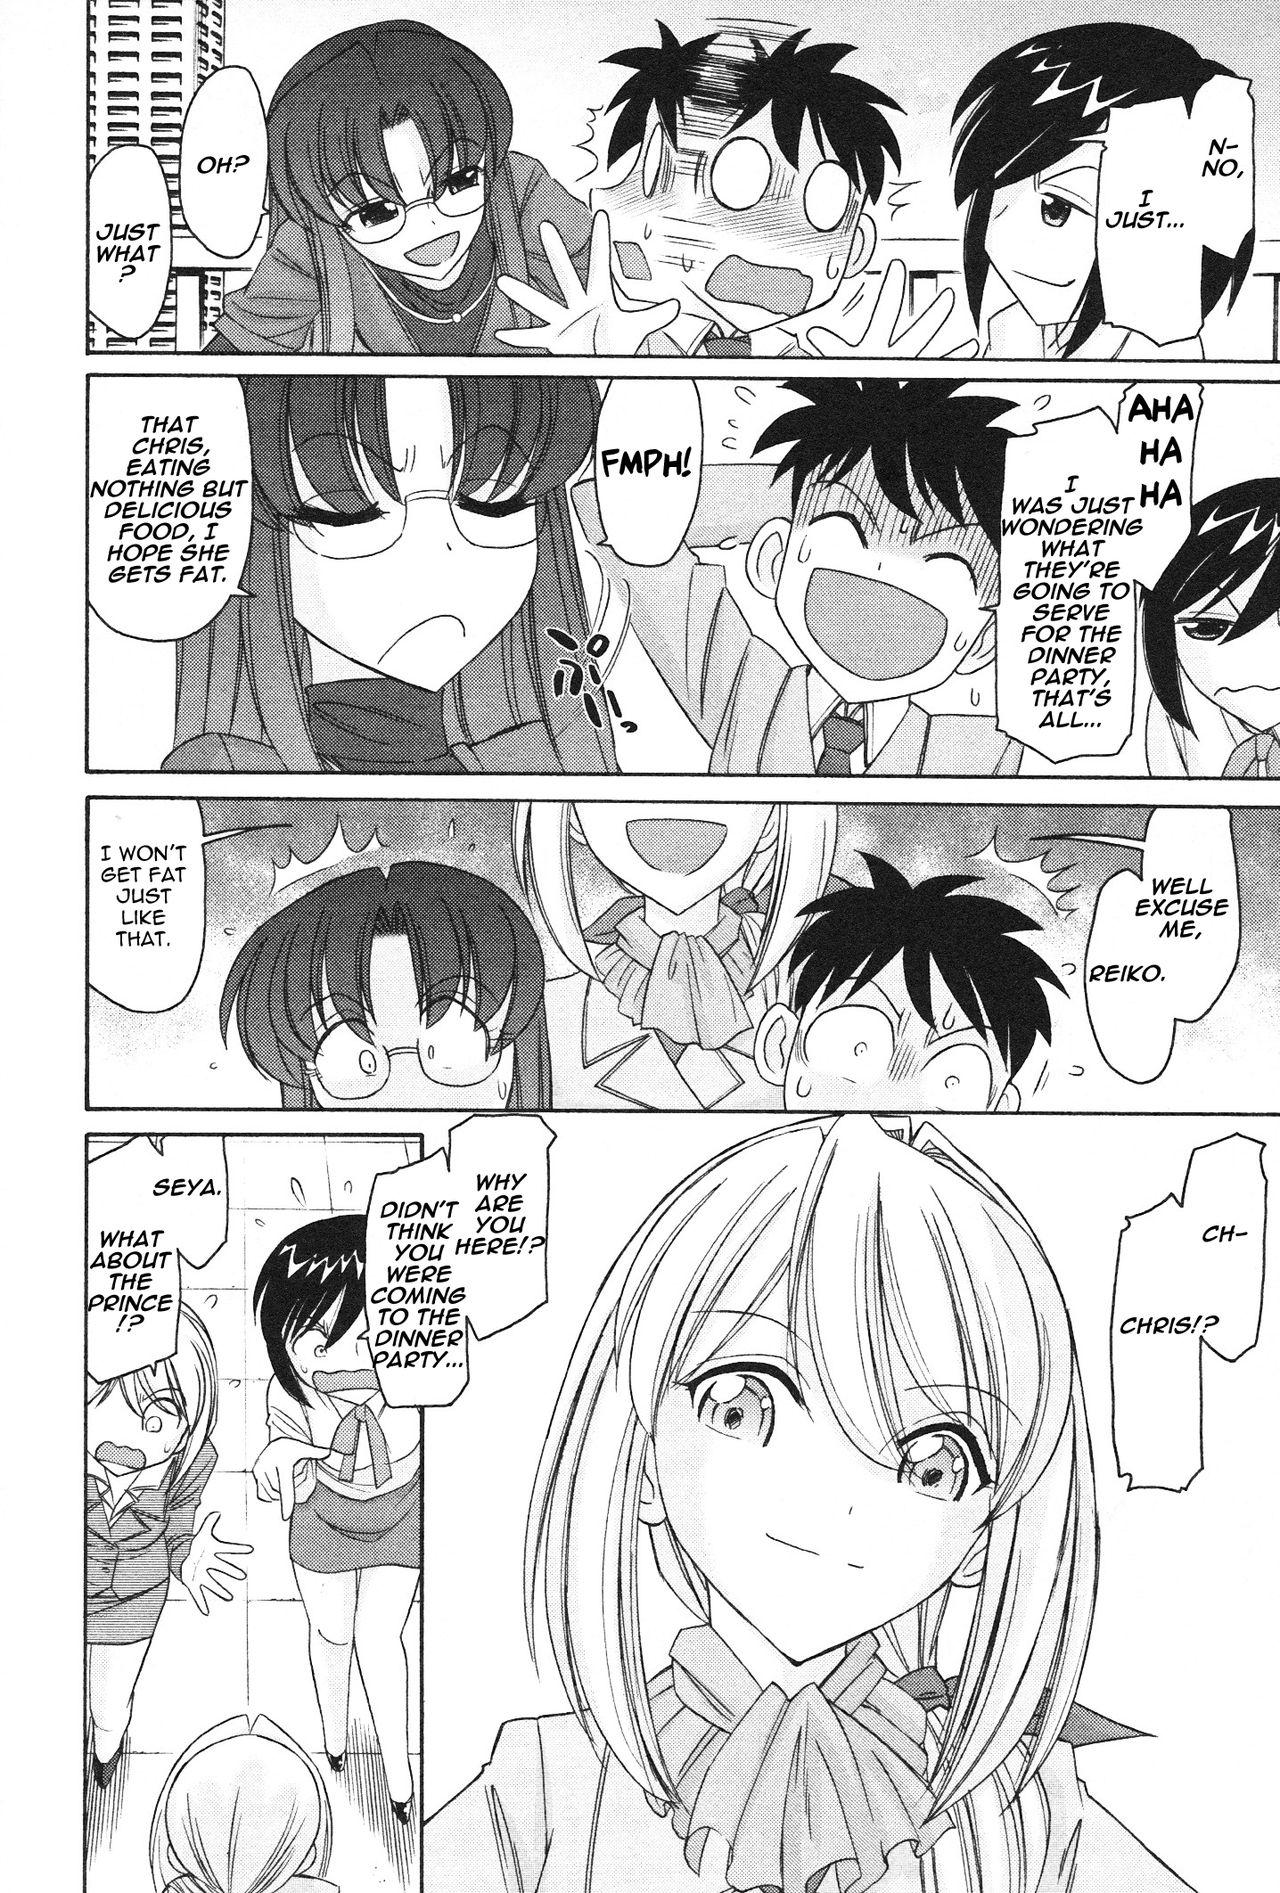 Best Blowjob Cheers! 12 Ch.100 Hentai - Page 5